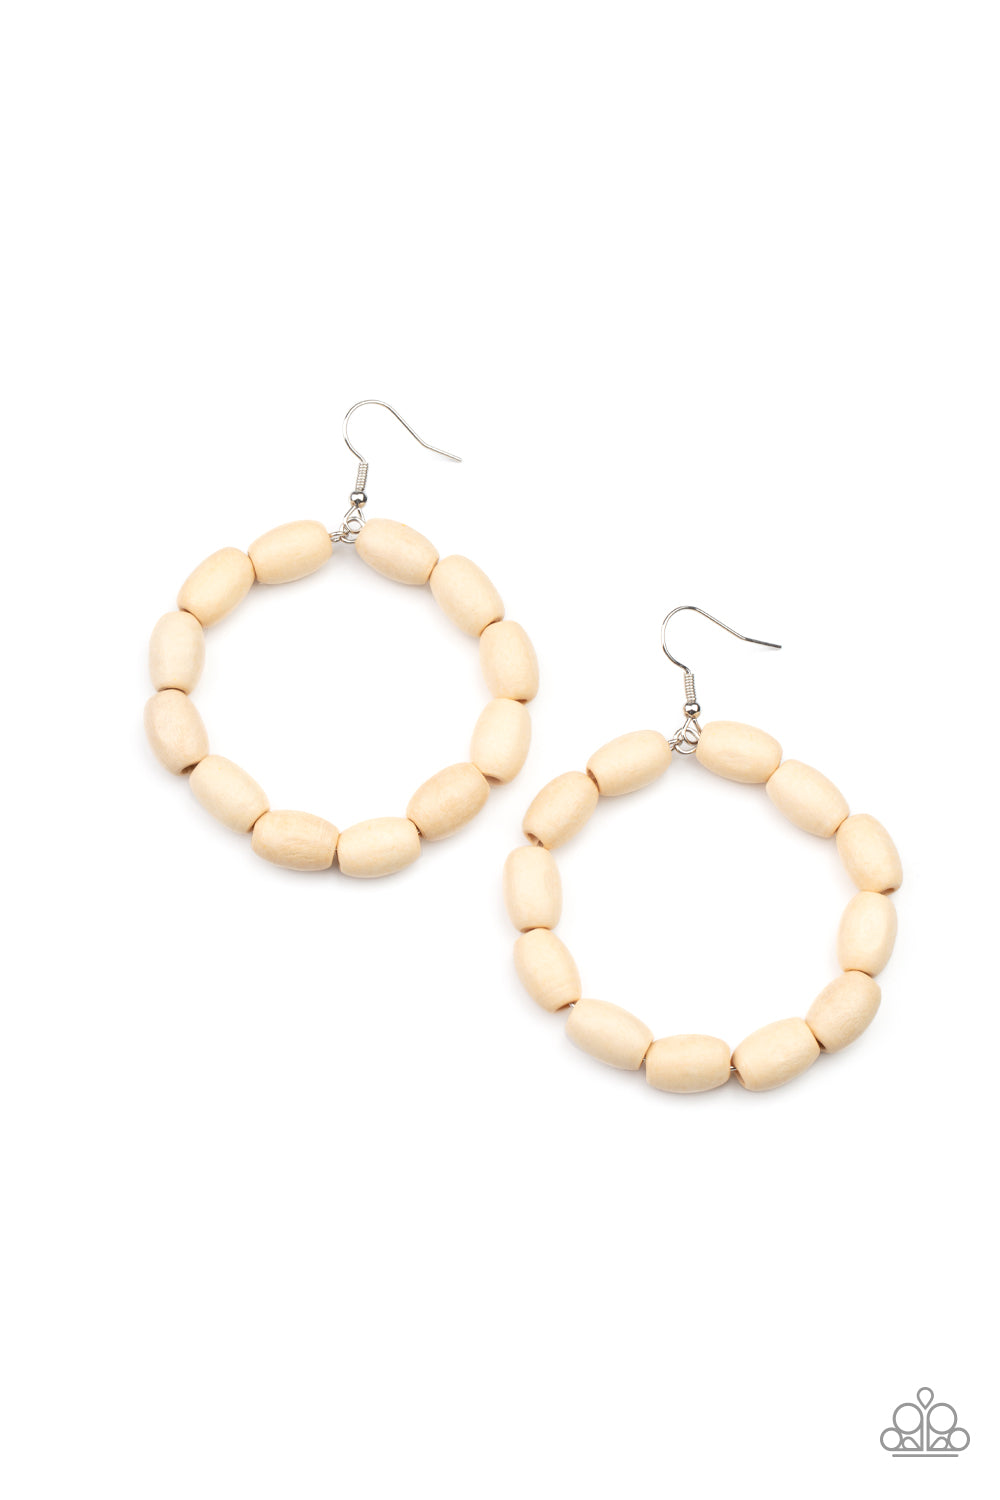 Paparazzi Accessories - Living The WOOD Life - White Earring